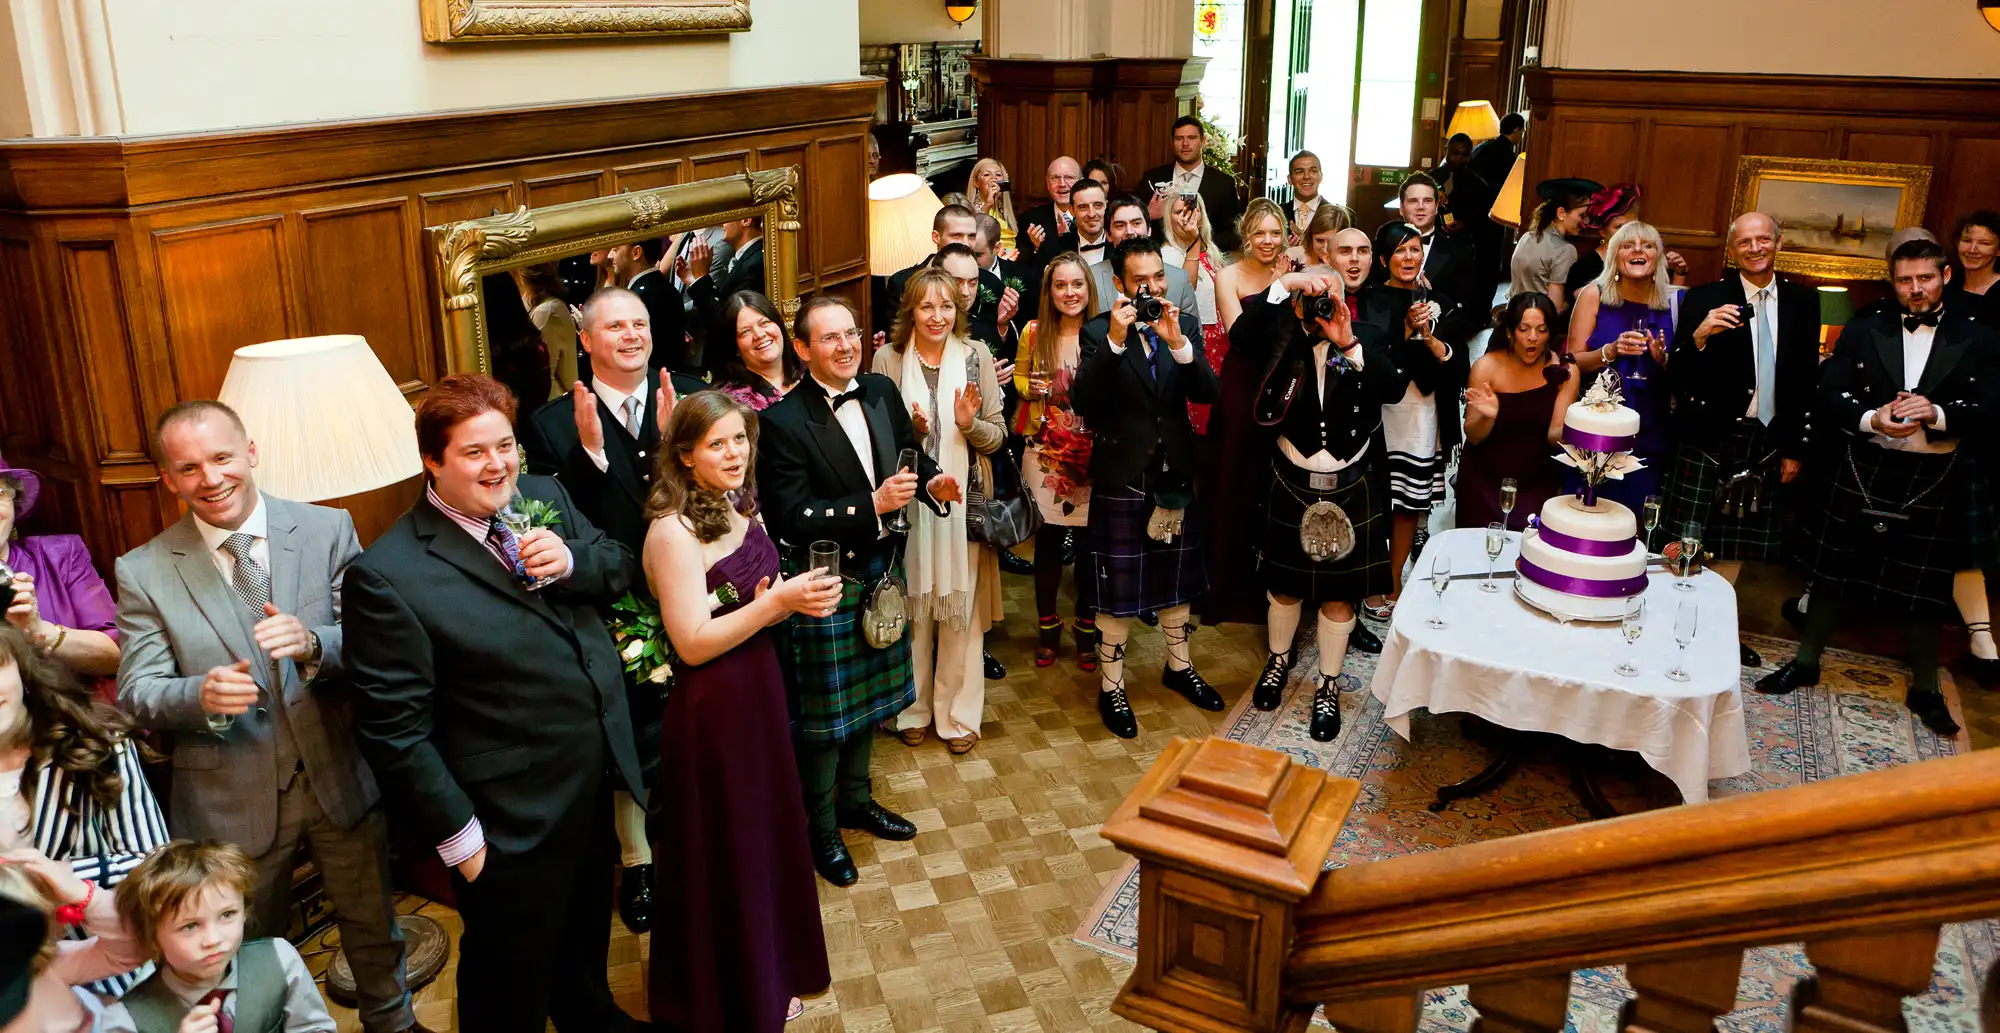 A diverse group of people in formal attire, including kilts, cheer with drinks at a wedding reception inside an elegant room.